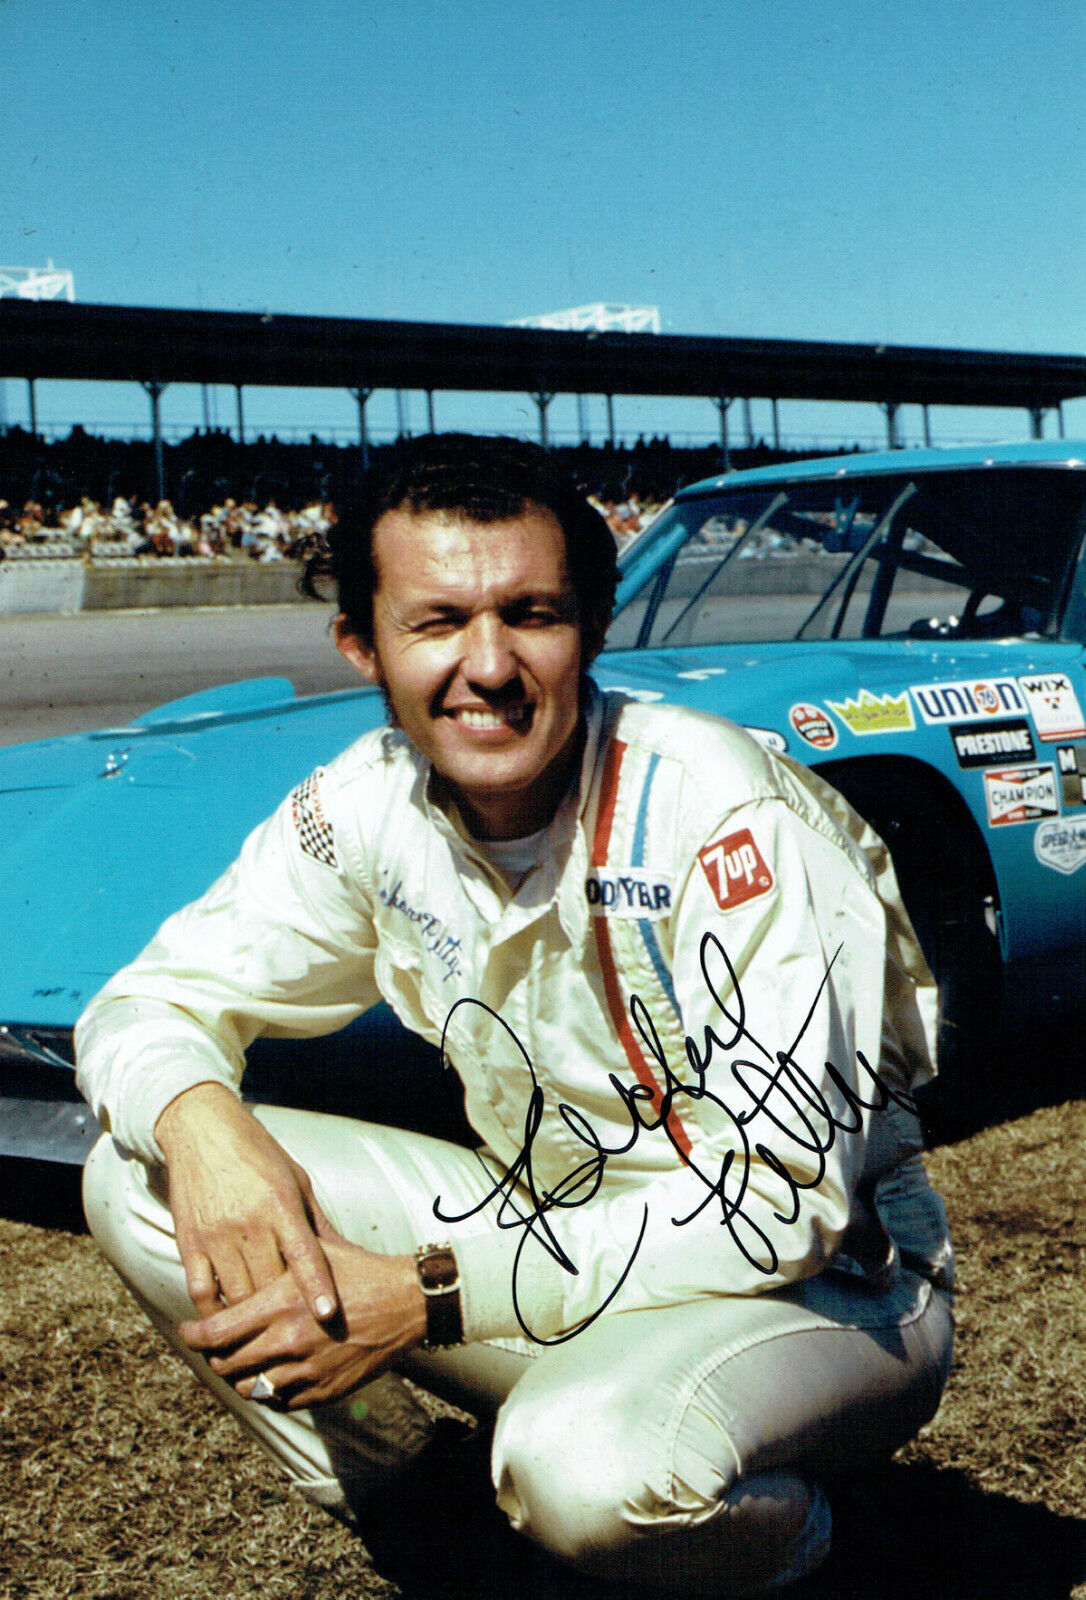 KING Richard PETTY SIGNED 12x8 Plymouth Superbird Photo Poster painting AFTAL Autograph COA